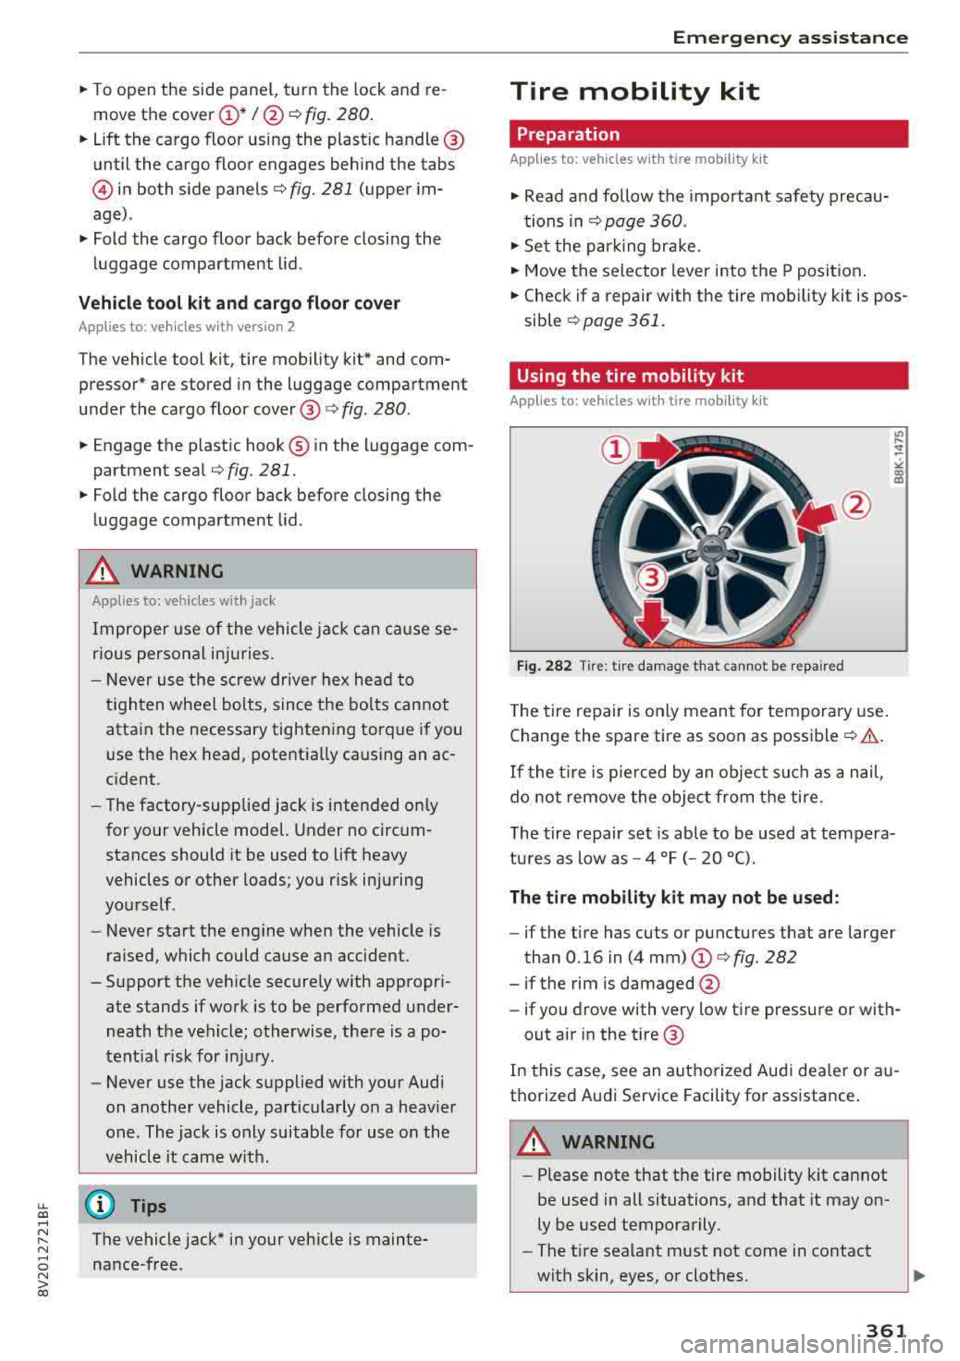 AUDI A3 SEDAN 2018  Owners Manual LL co ..... N 
" N ..... 0 N > co 
"To open  the  side  panel,  turn  the  lock and  re ­
move  the  cover 
<D * I@ ¢ fig. 280 . 
"Lift the  cargo  floor  using  the  plastic  handle @ 
unt il the  